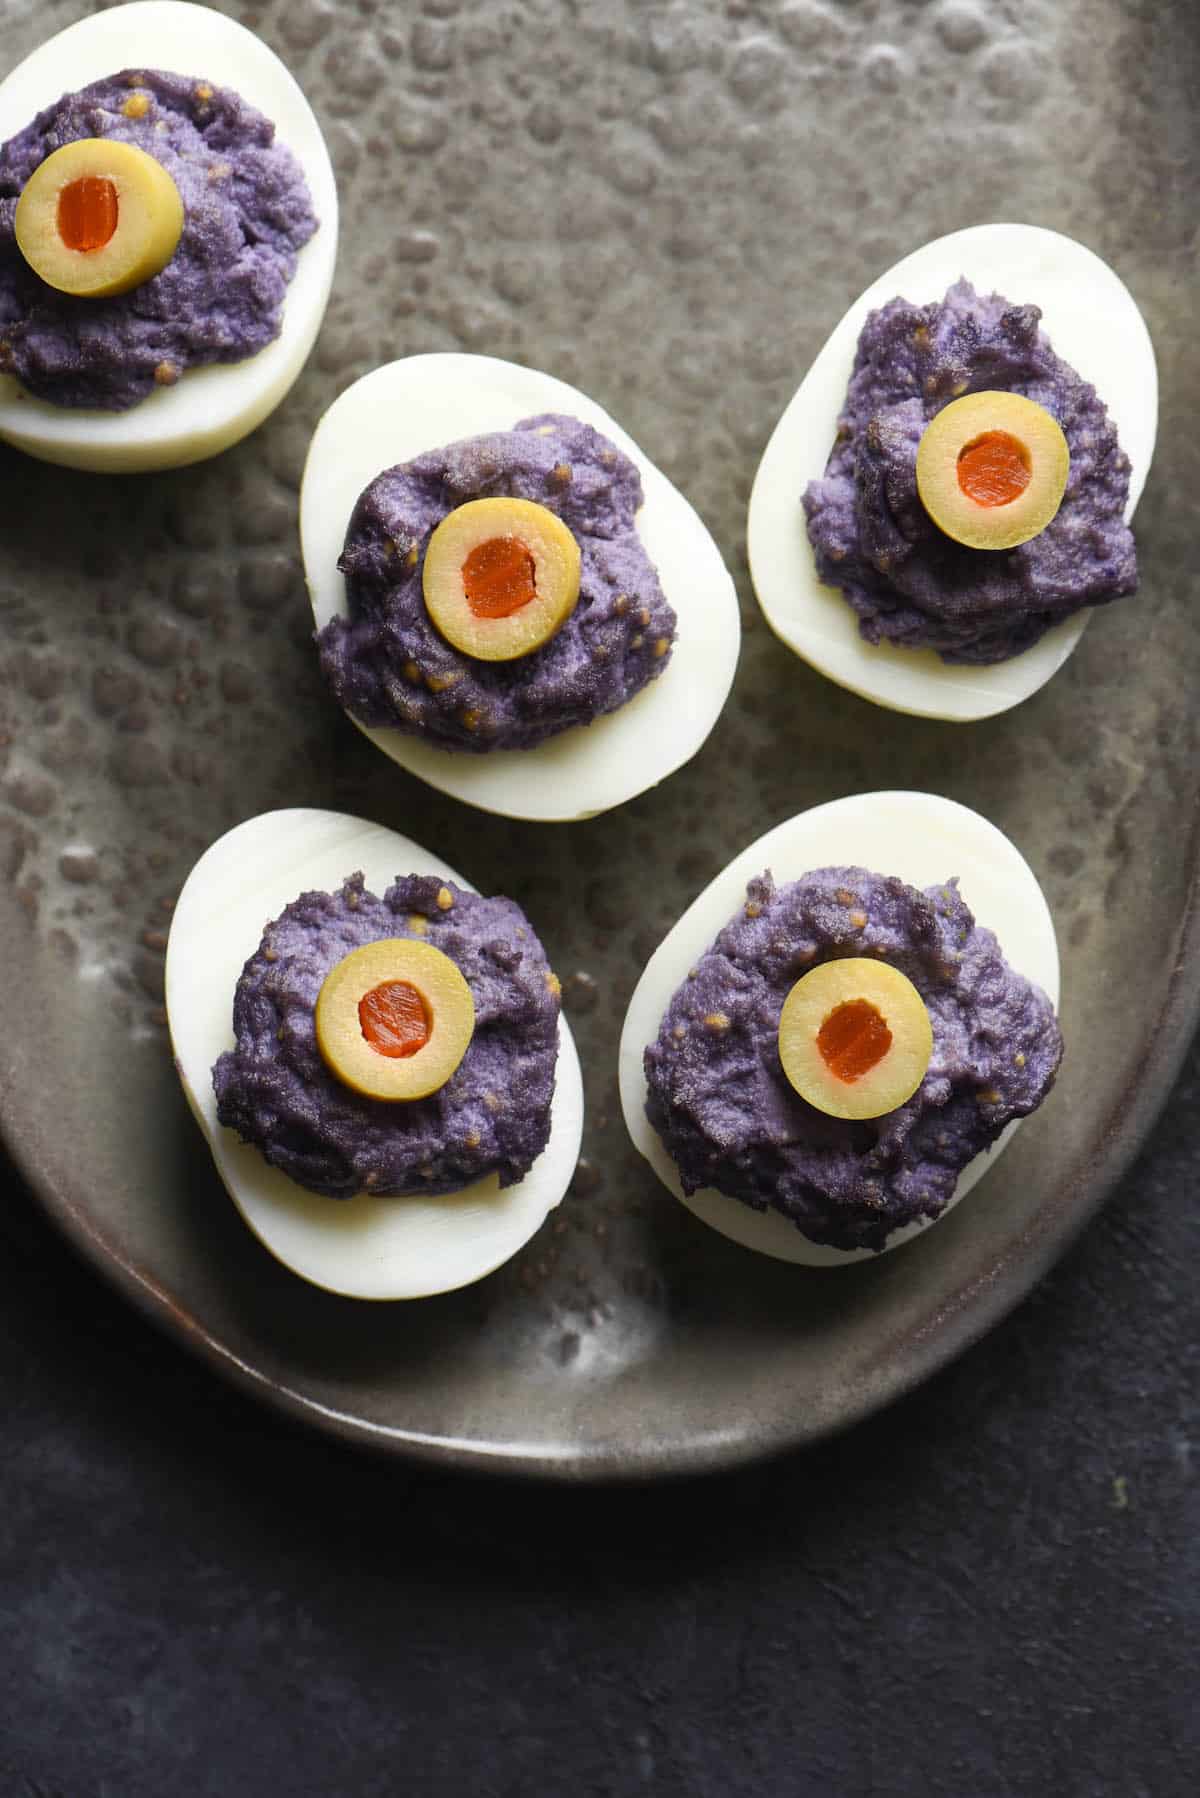 Eyeball deviled eggs with dyed purple yolks and green olive "eyeballs" on top.